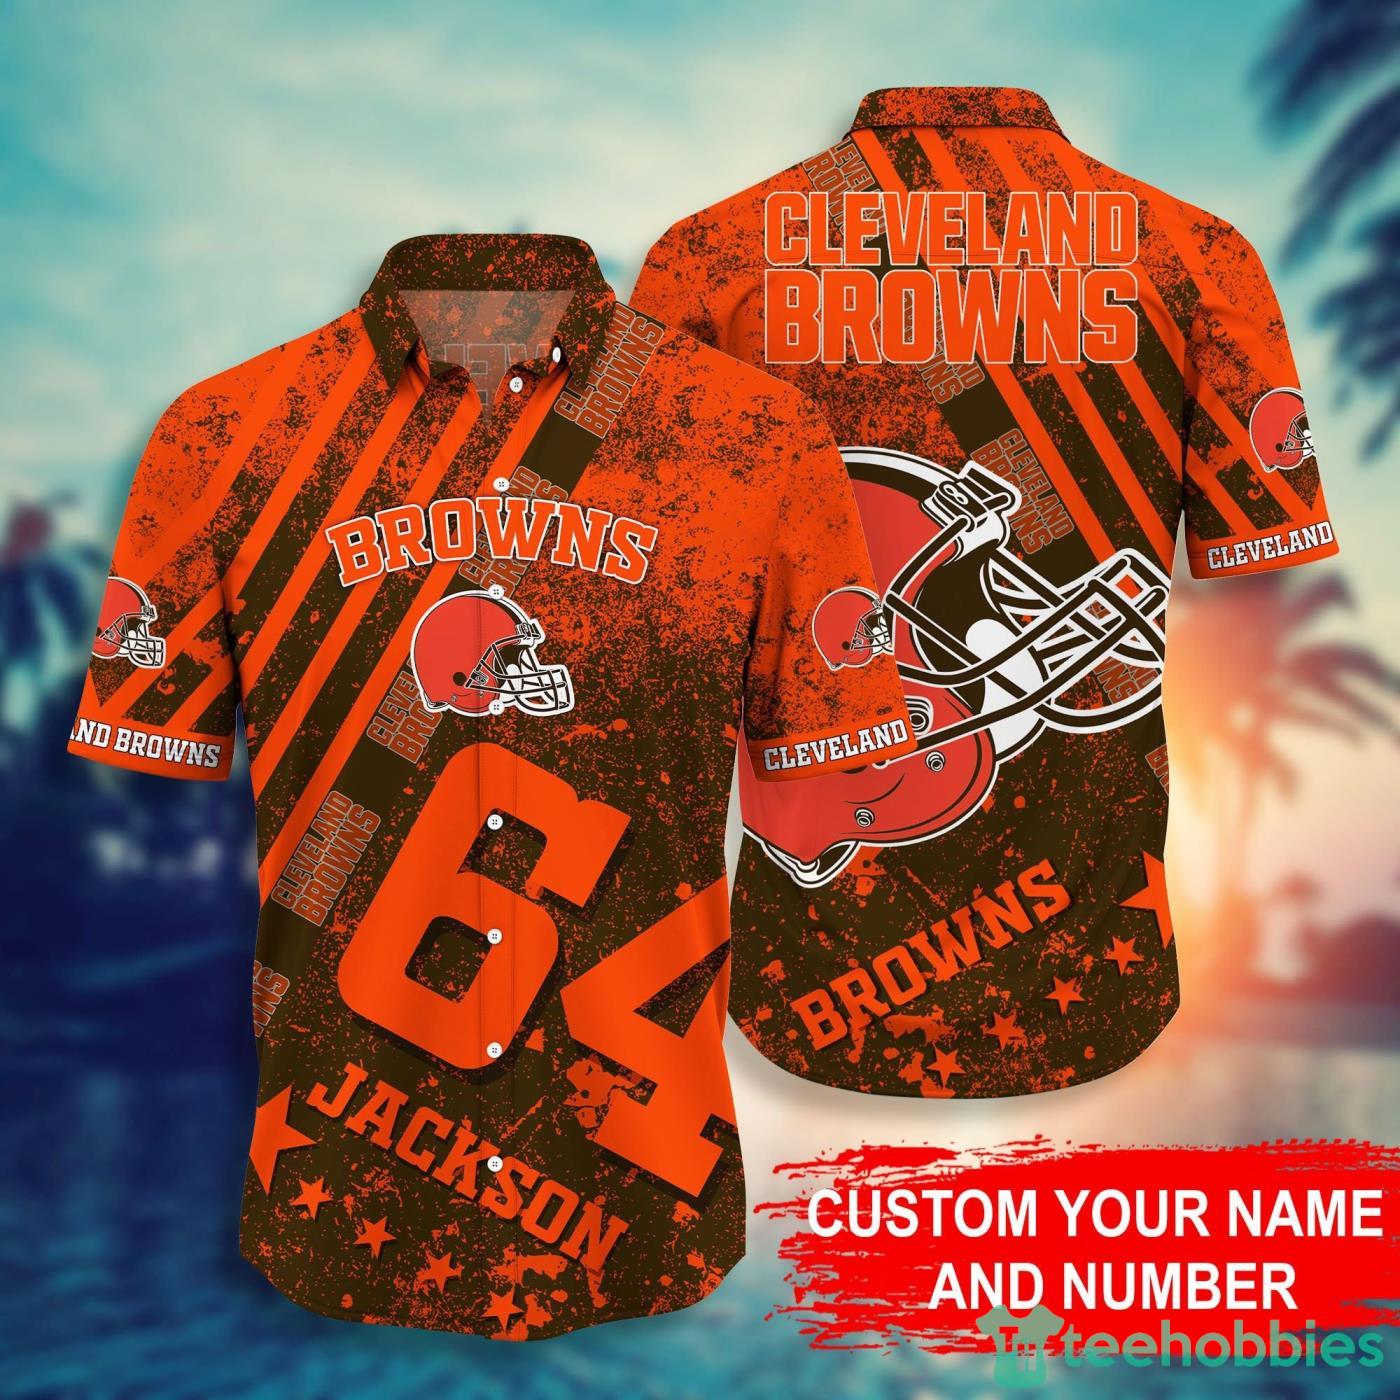 Cleveland Browns NFL Personalized Dirty Grunge Style hort Sleeves Hawaiian Shirt Product Photo 1